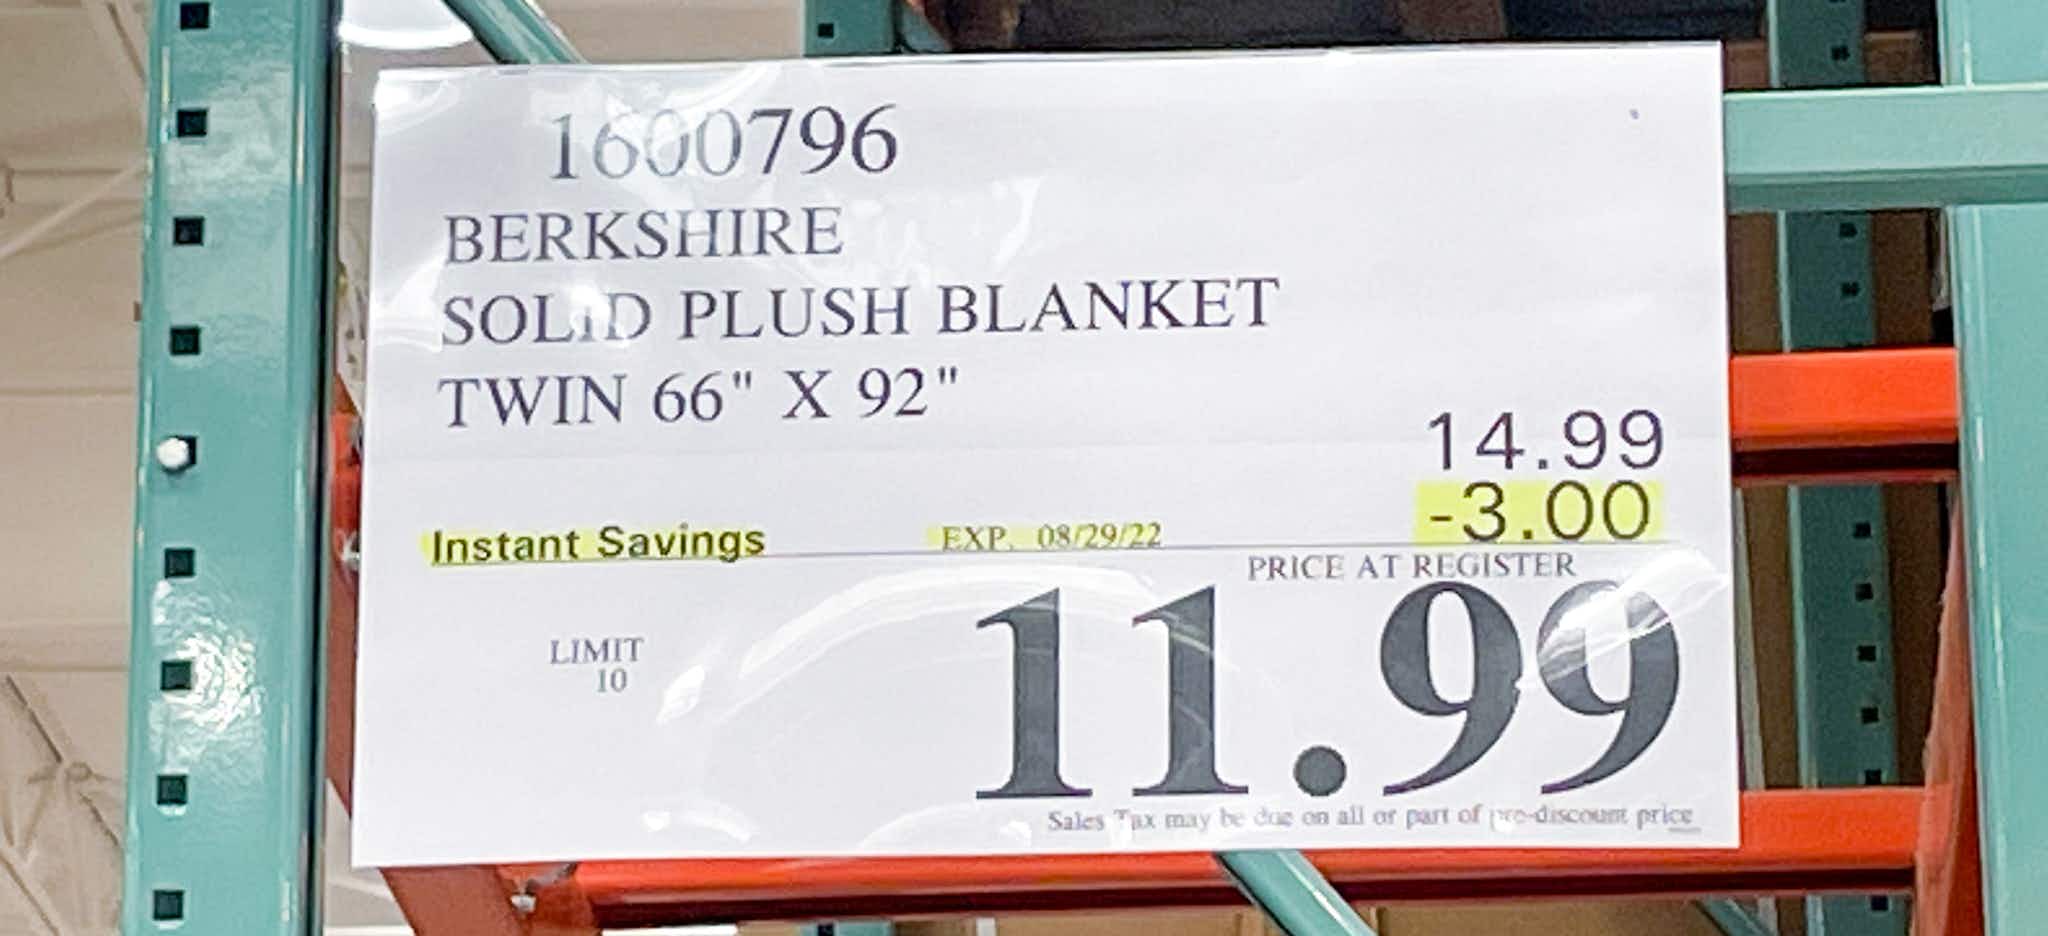 sales sign for blanket at costco